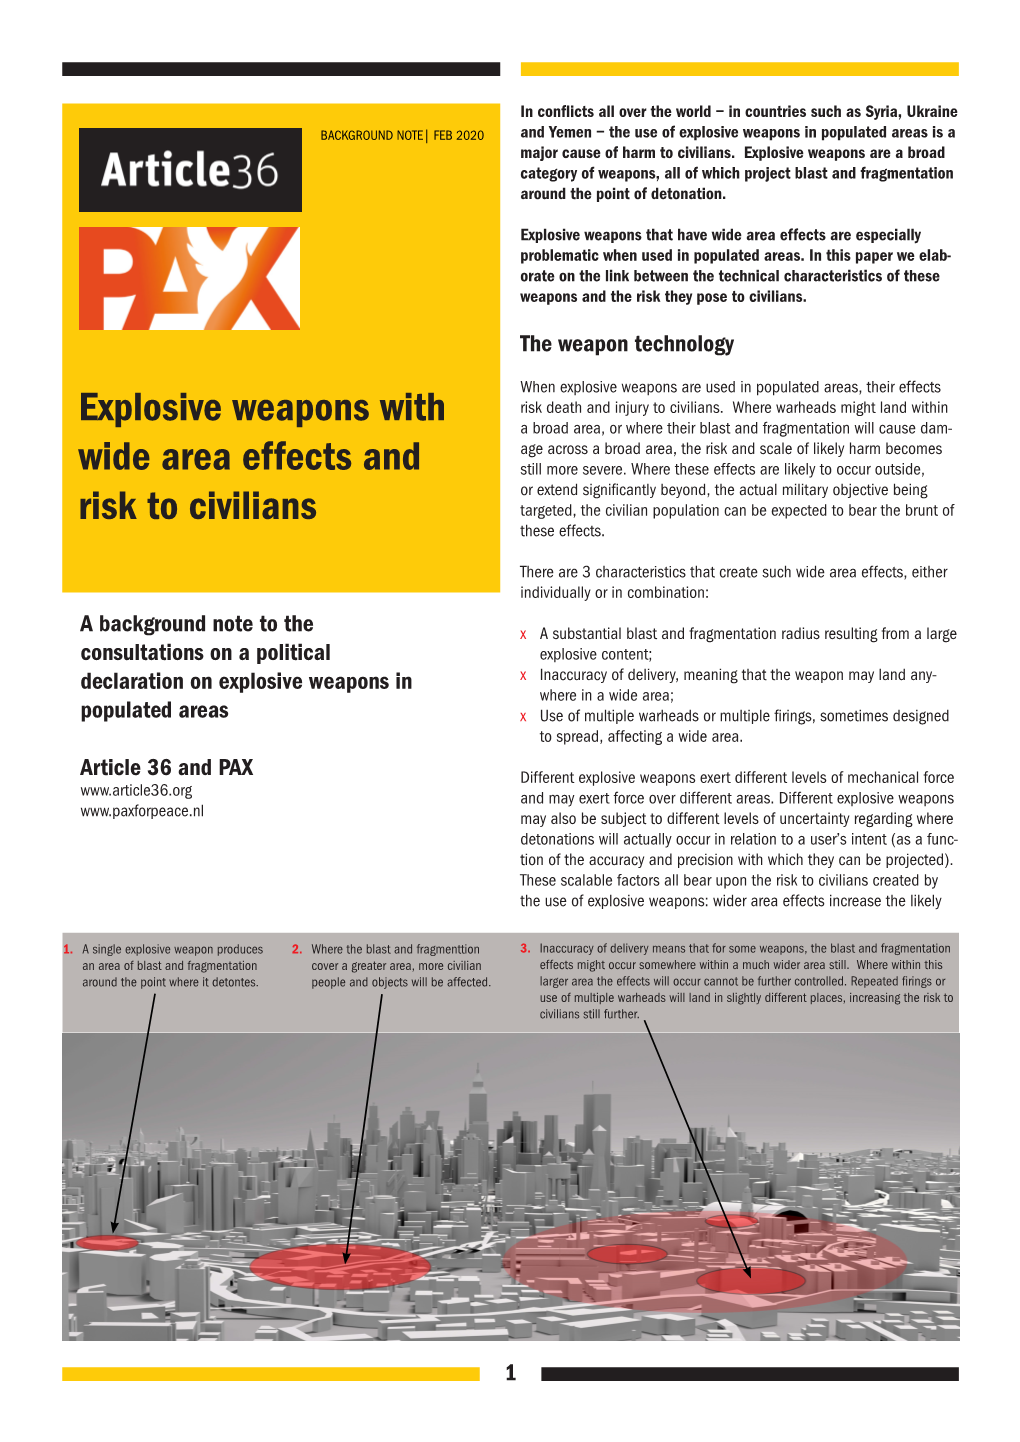 Explosive Weapons with Wide Area Effects and Risk to Civilians